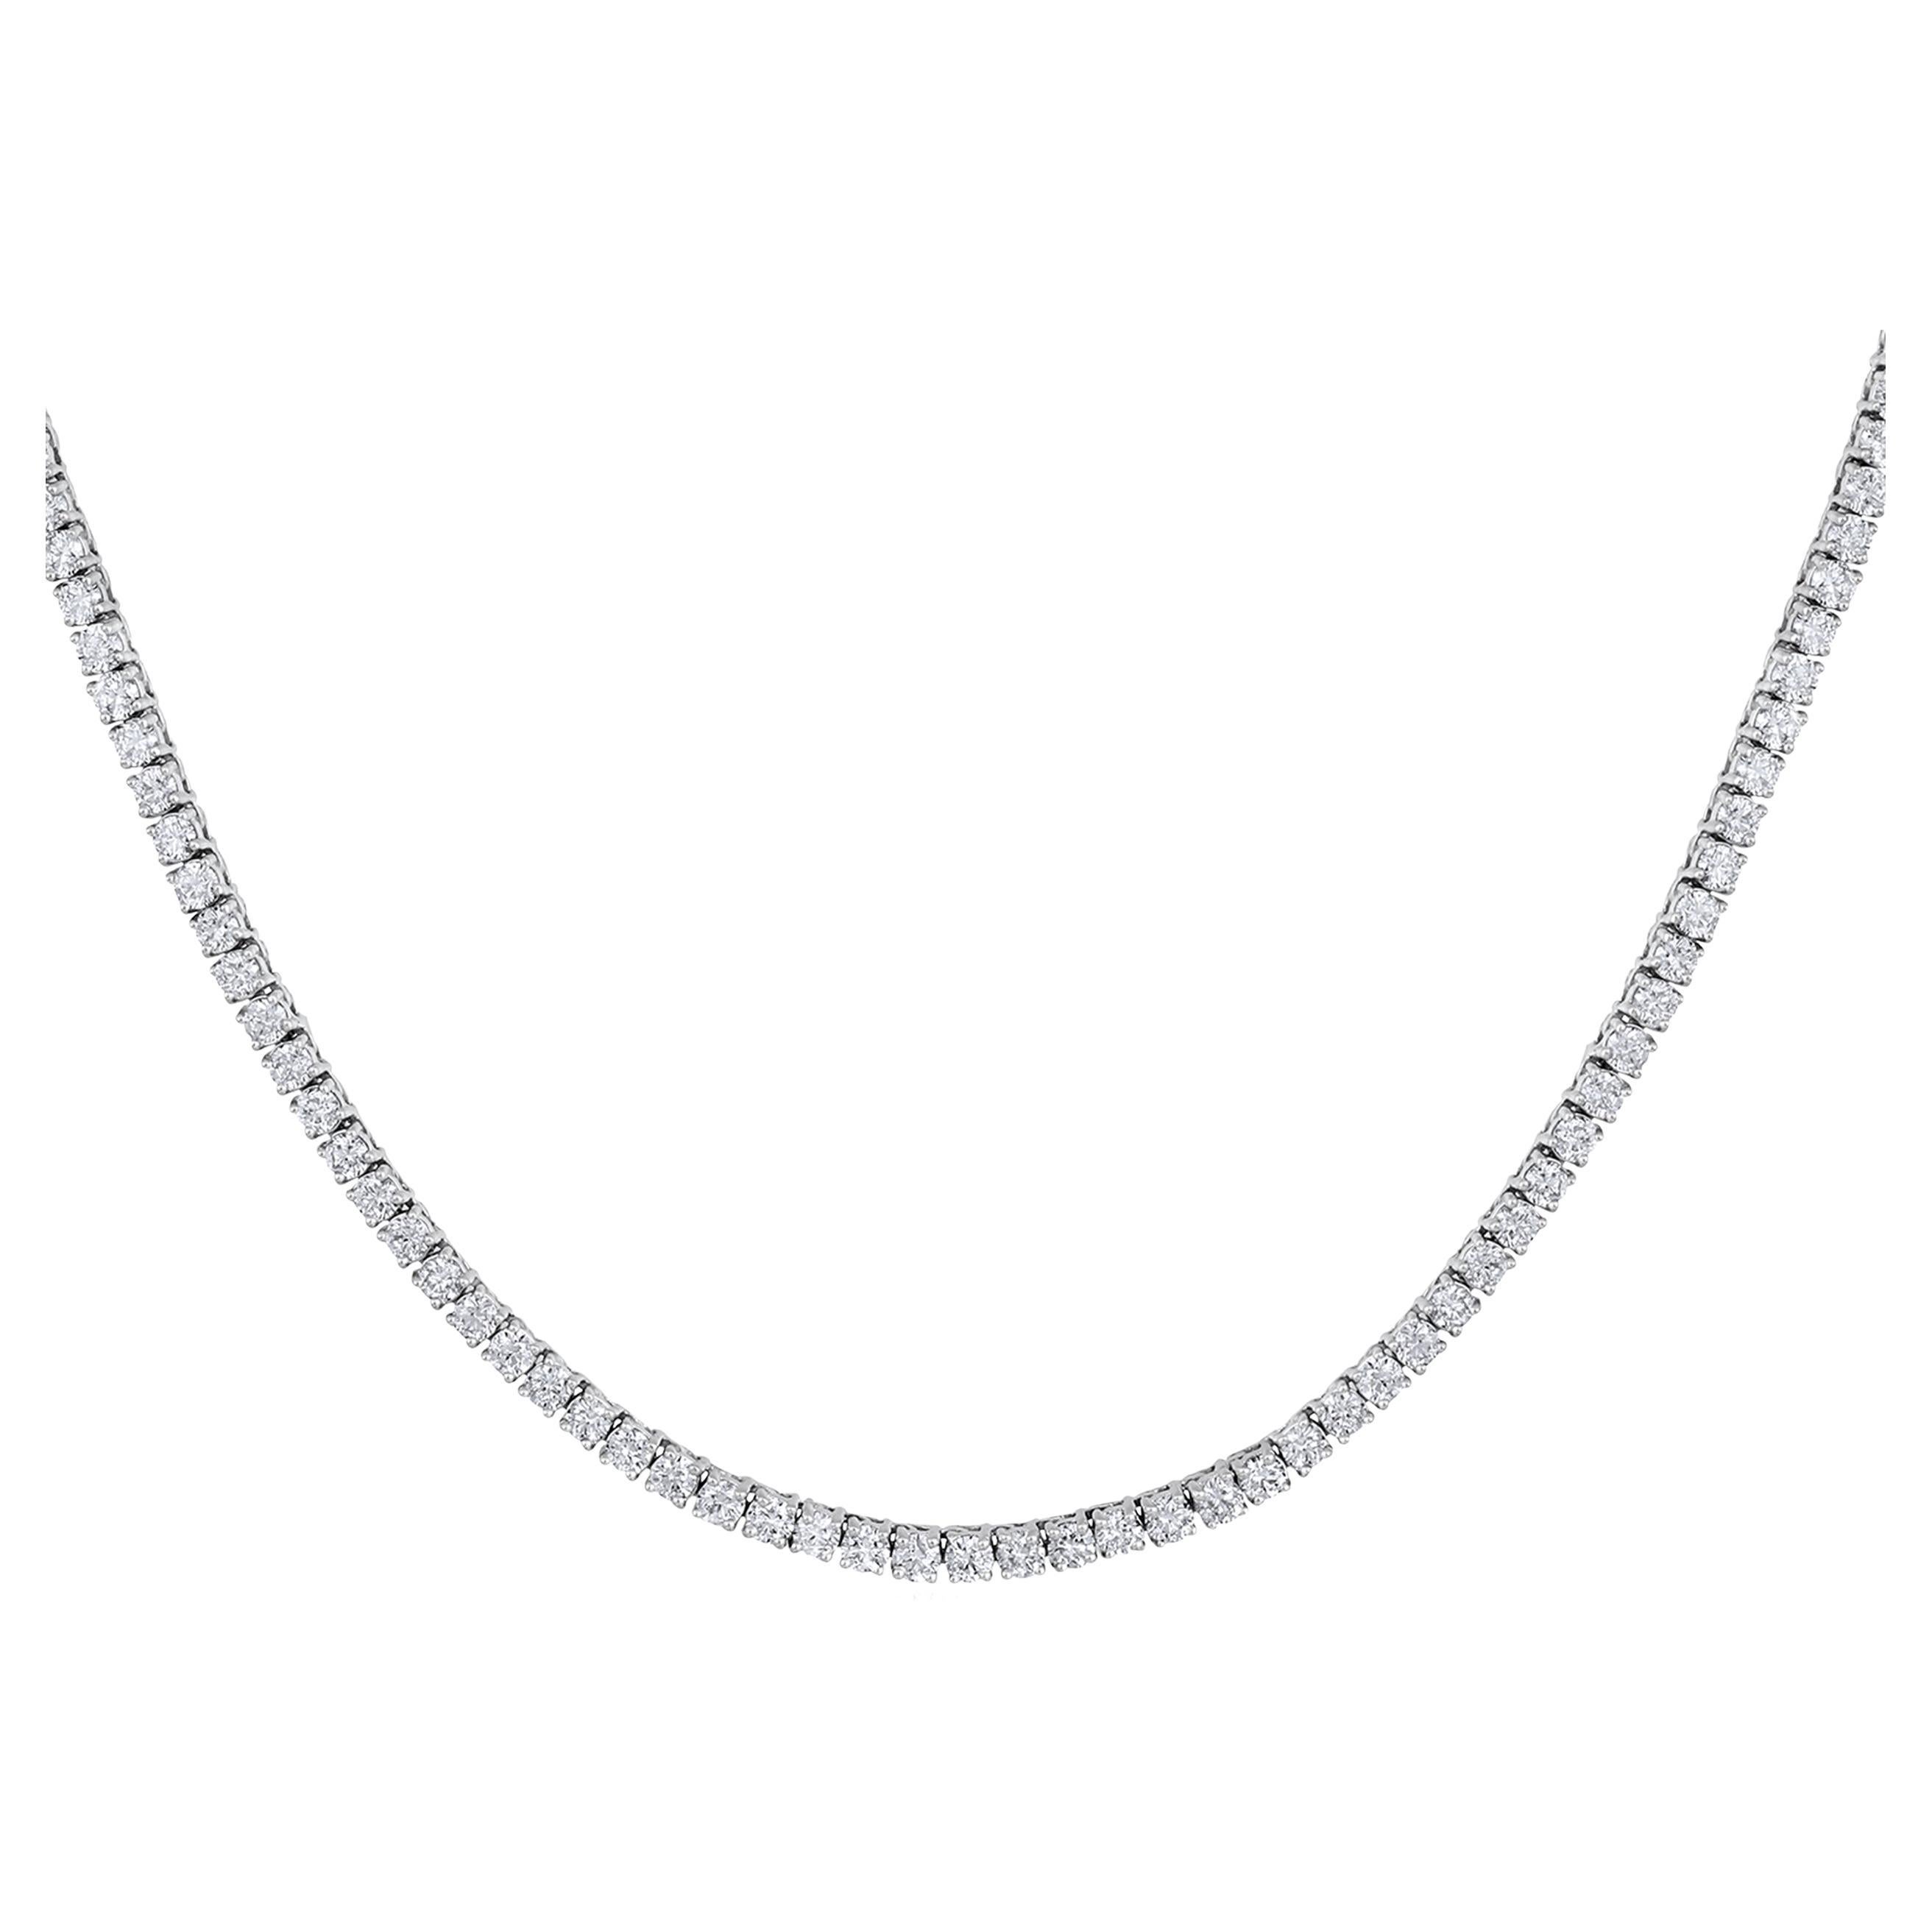 Certified 14k Gold 4.8 Carat Natural Diamond 4 Prong Tennis Wedding Necklace For Sale